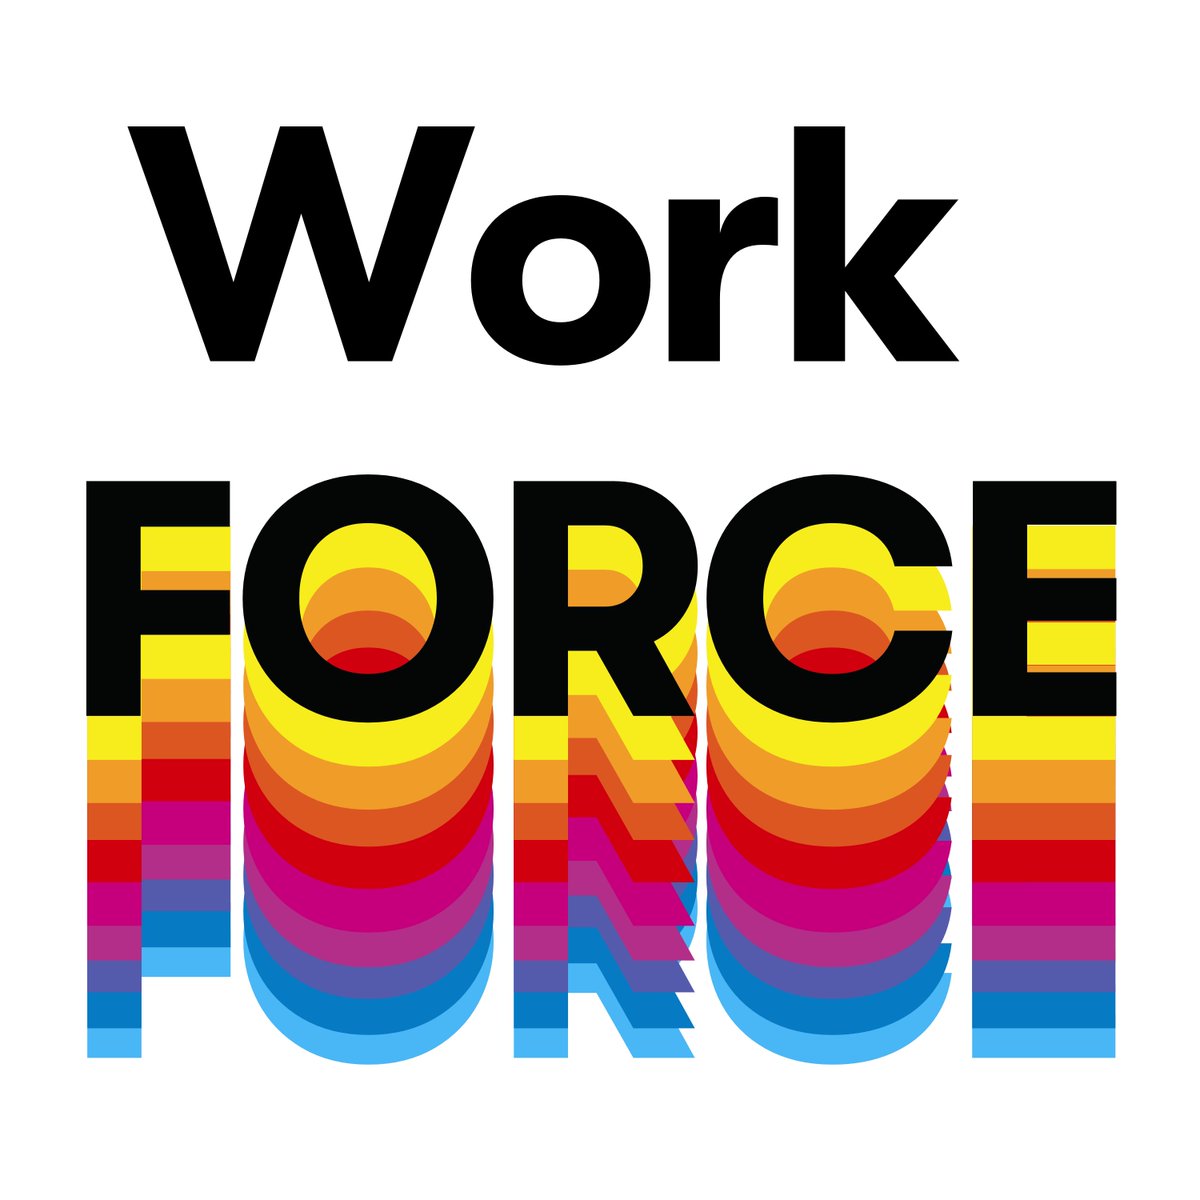 I was honored to be interviewed by @profgracelordan Director of @LSE_TII for her #WorkForcePod #FutureOfWork podcast on 'Is technology stealing your job?', on AI ethics, highlighting AI as a mediocre (by itself) but highly useful tool for human creativity. open.spotify.com/episode/5J8v65…